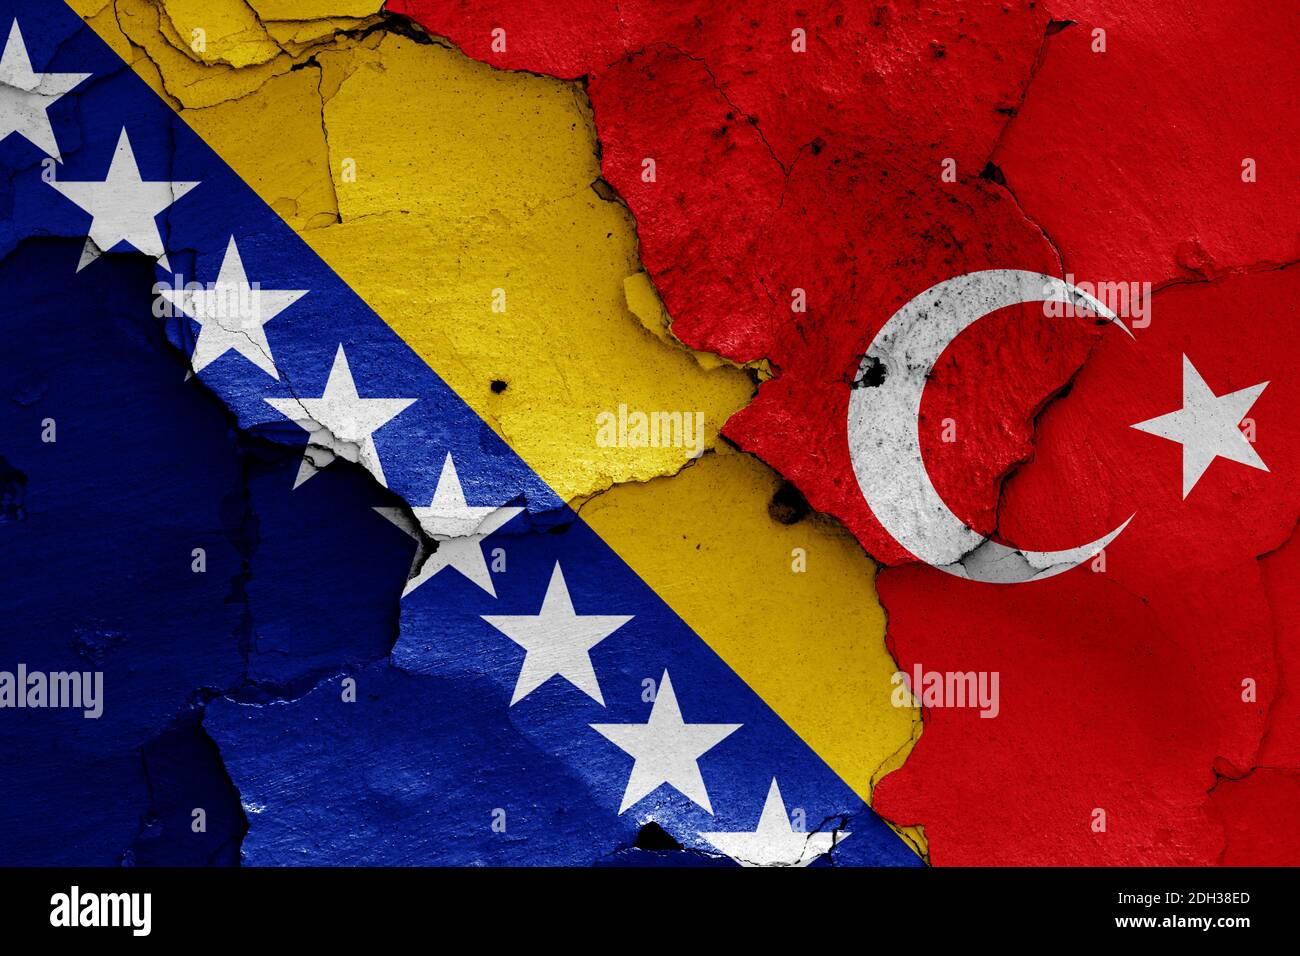 Flags of Bosnia and Herzegovina and Turkey painted on cracked wall Stock Photo